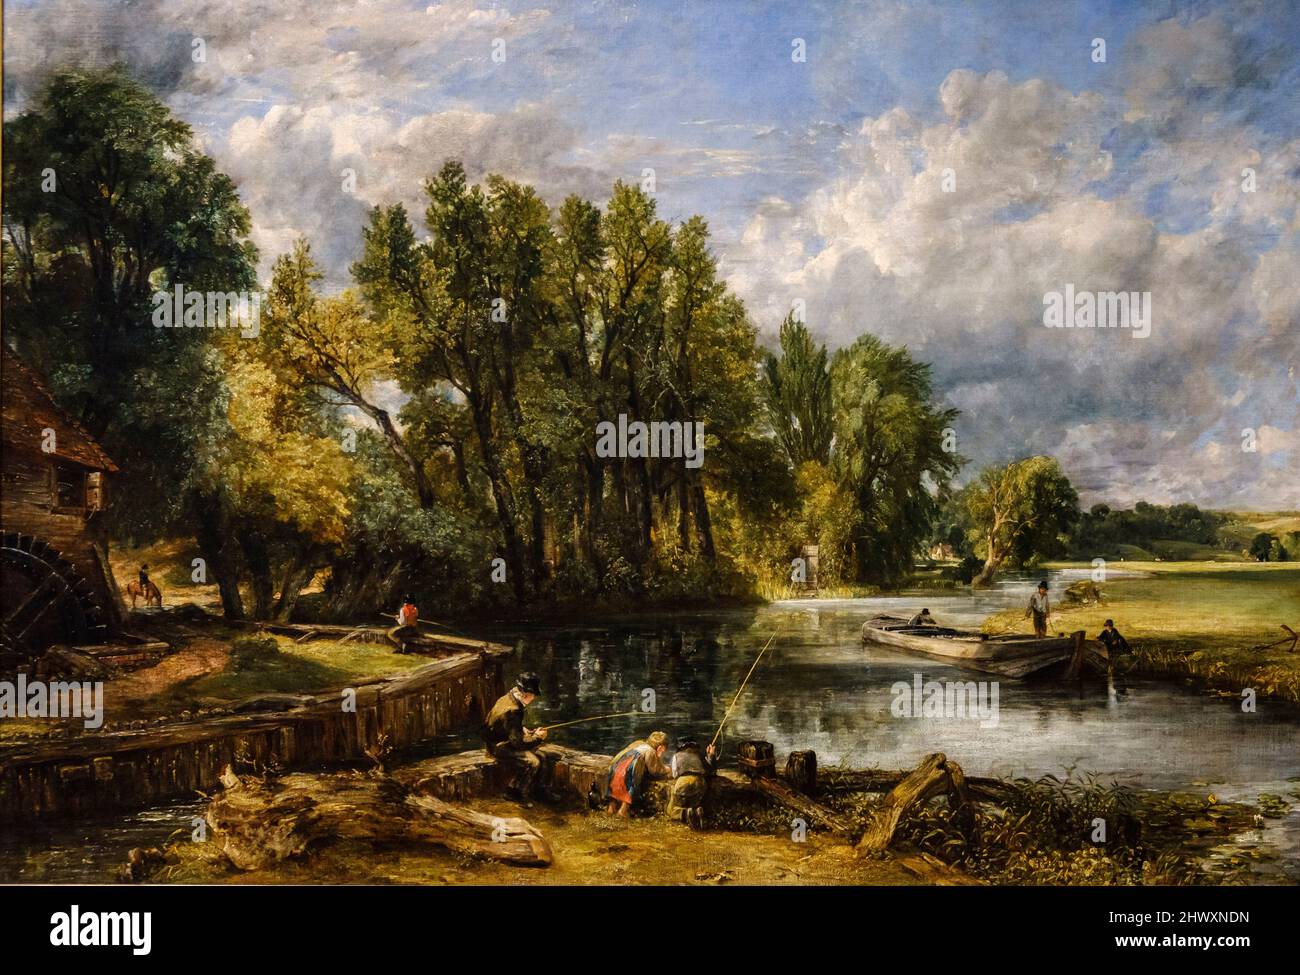 John Constable, Stratford Mill, 1820, huile sur toile, National Gallery, Londres, Angleterre, Grande-Bretagne Banque D'Images